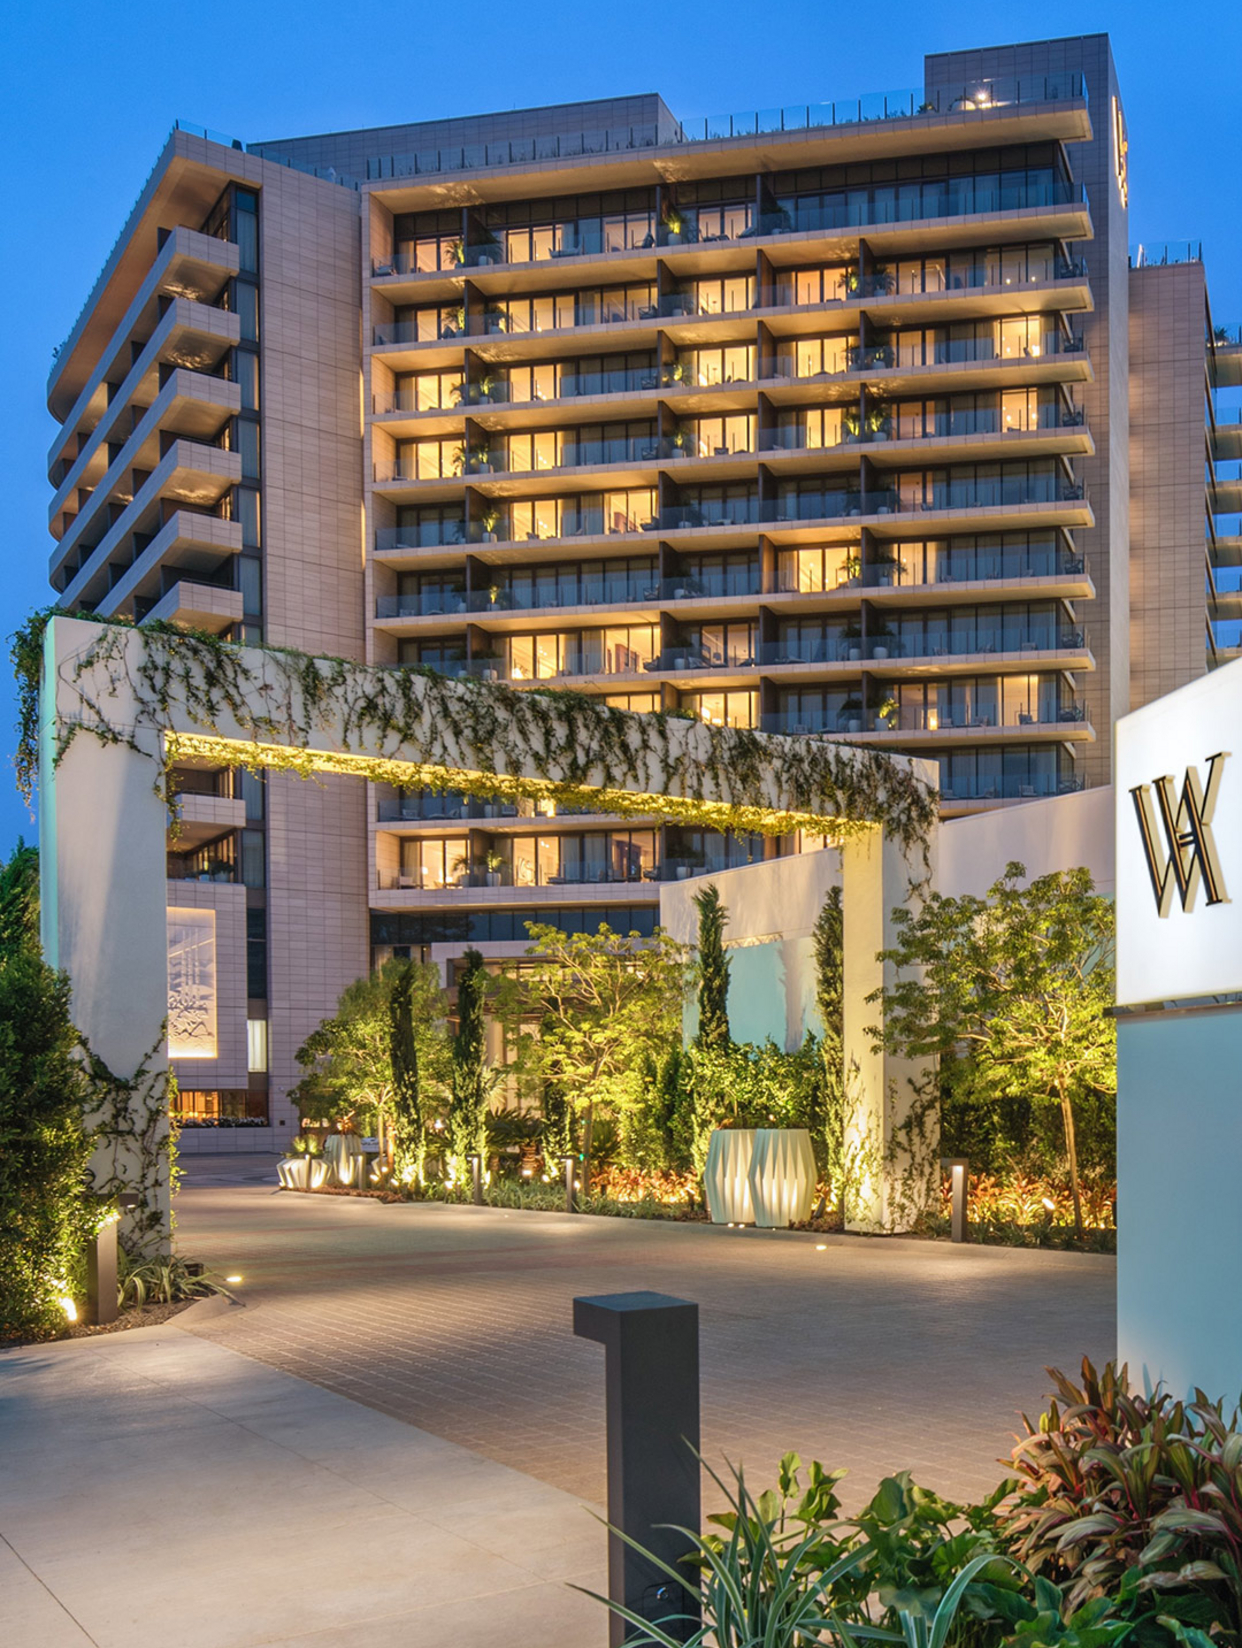 Image: The Beverly Hilton and Waldorf Astoria Beverly Hills Hotel, USA